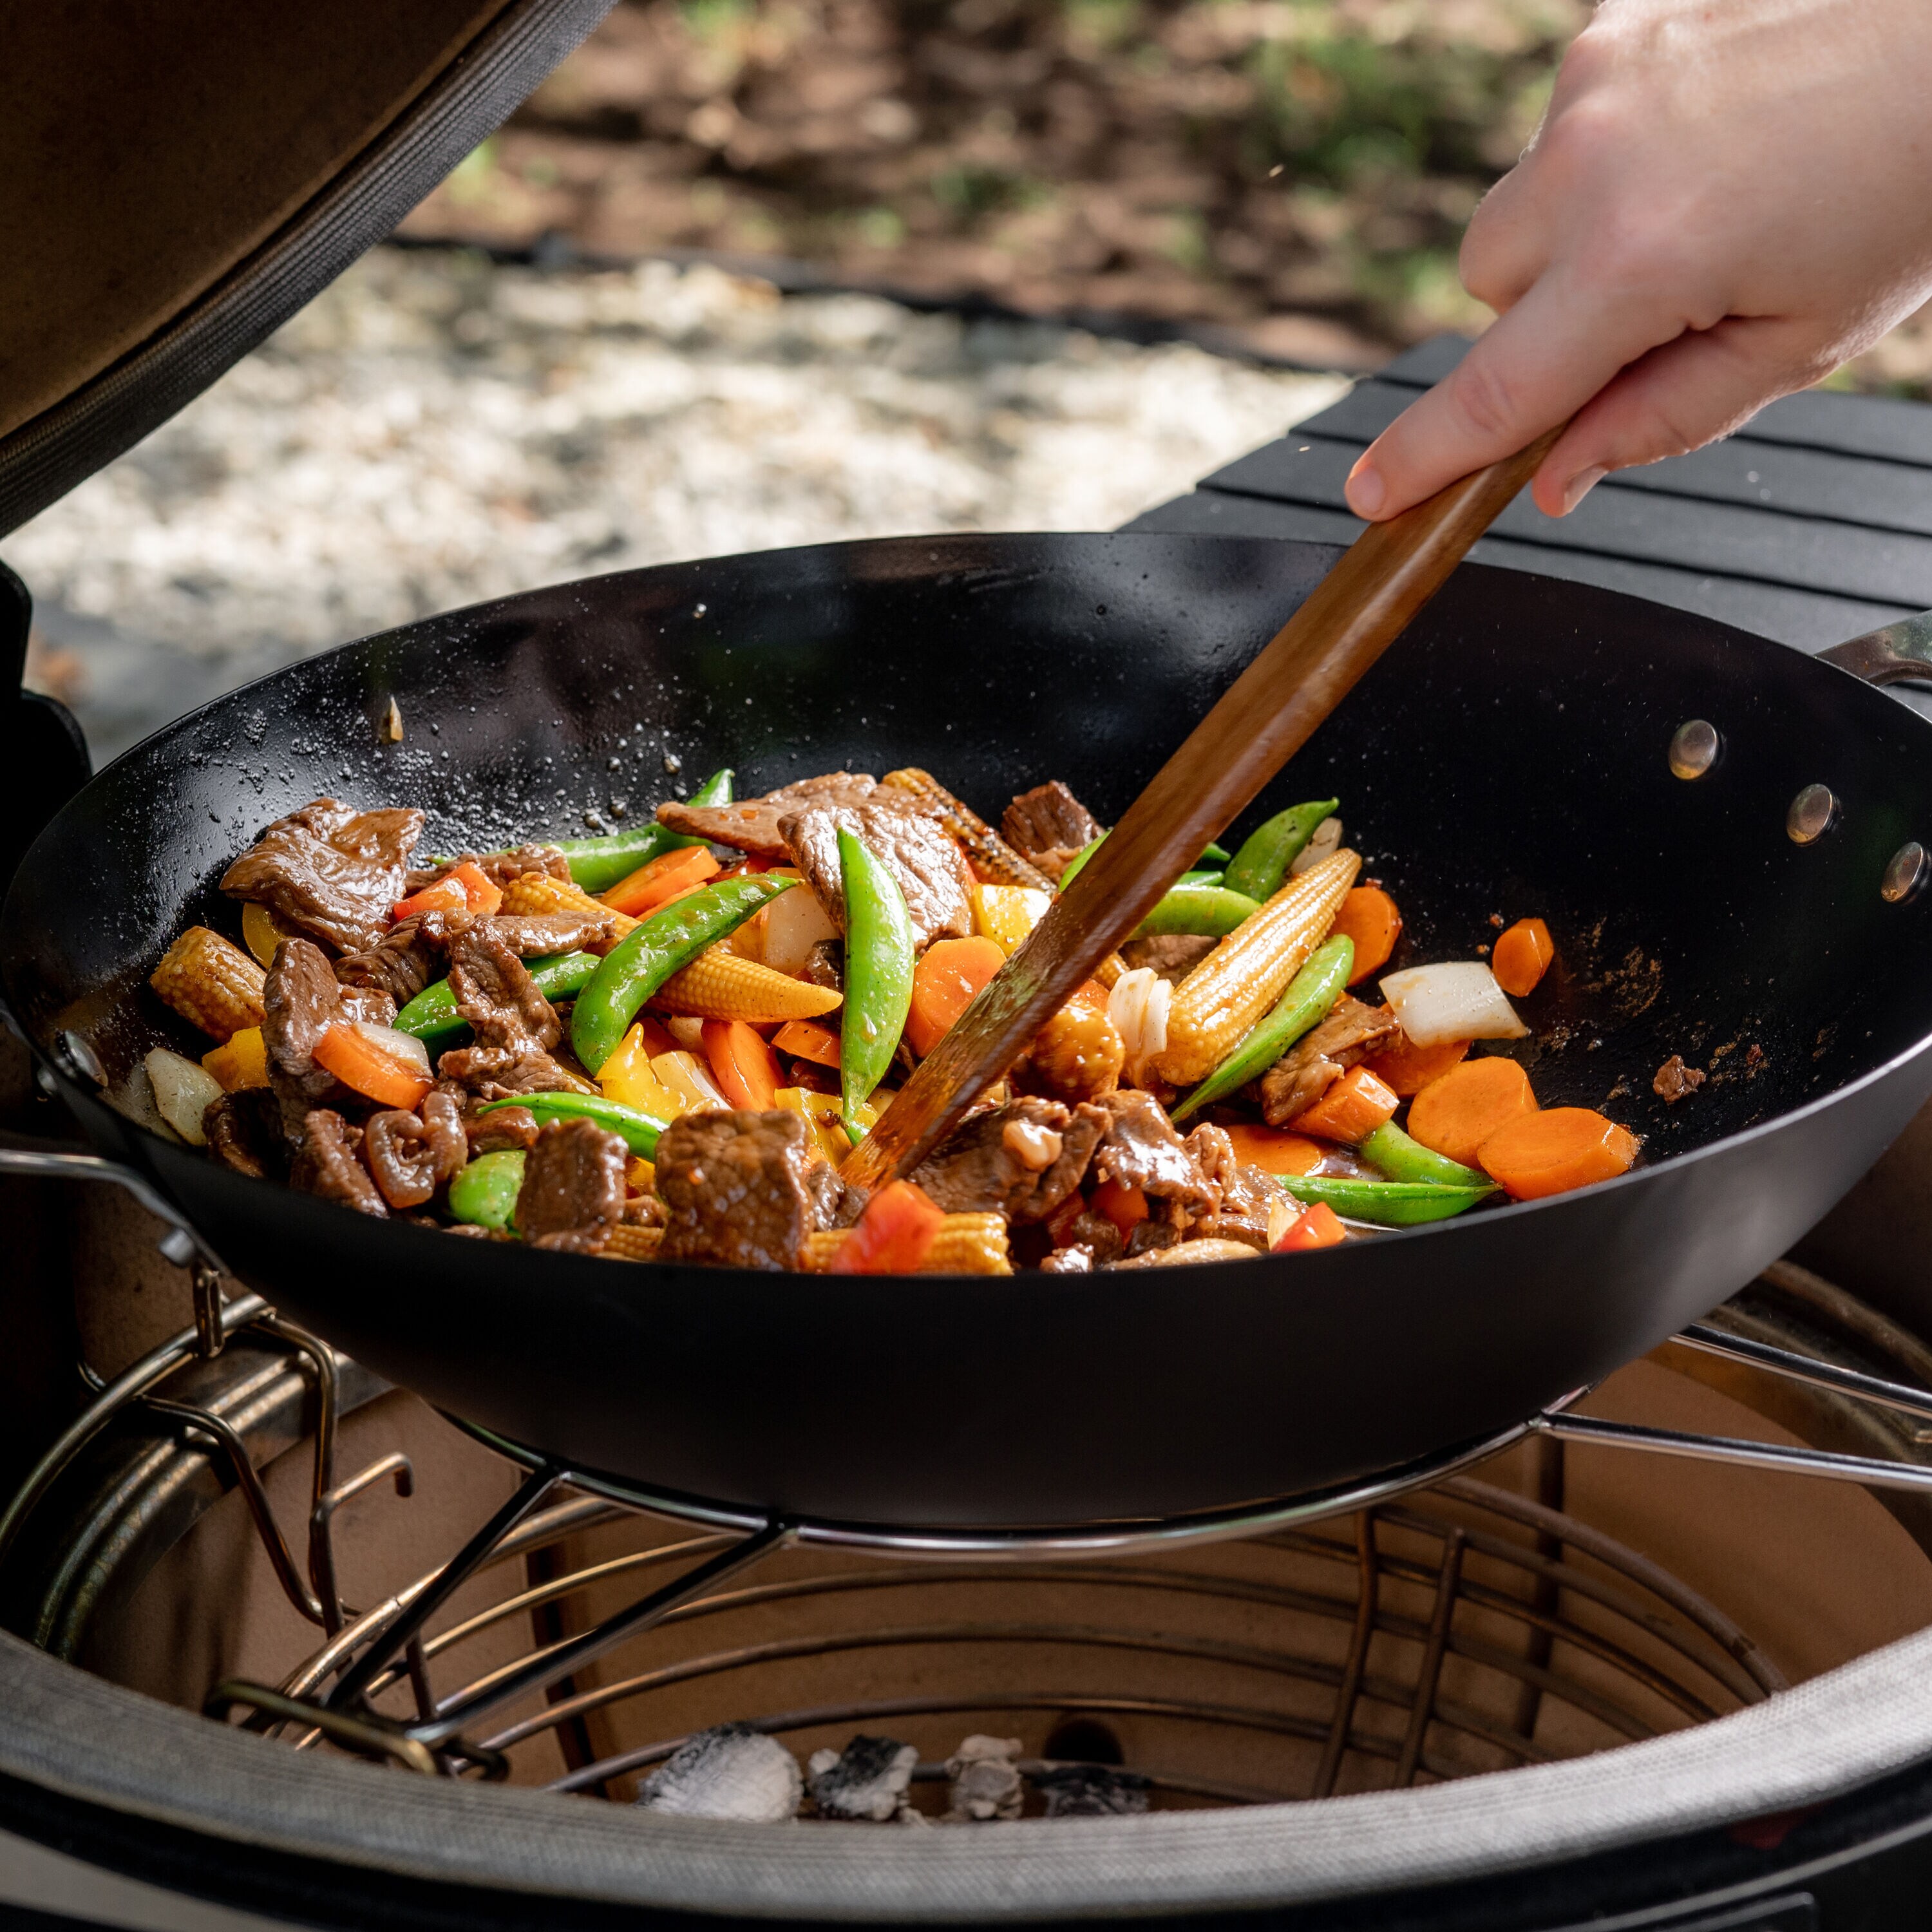 Mr Bar-B-Q 10 Cast Iron Pre Seasoned Curved Wok Outdoor and Indoor Use  08124Y, 1 Each - Fry's Food Stores